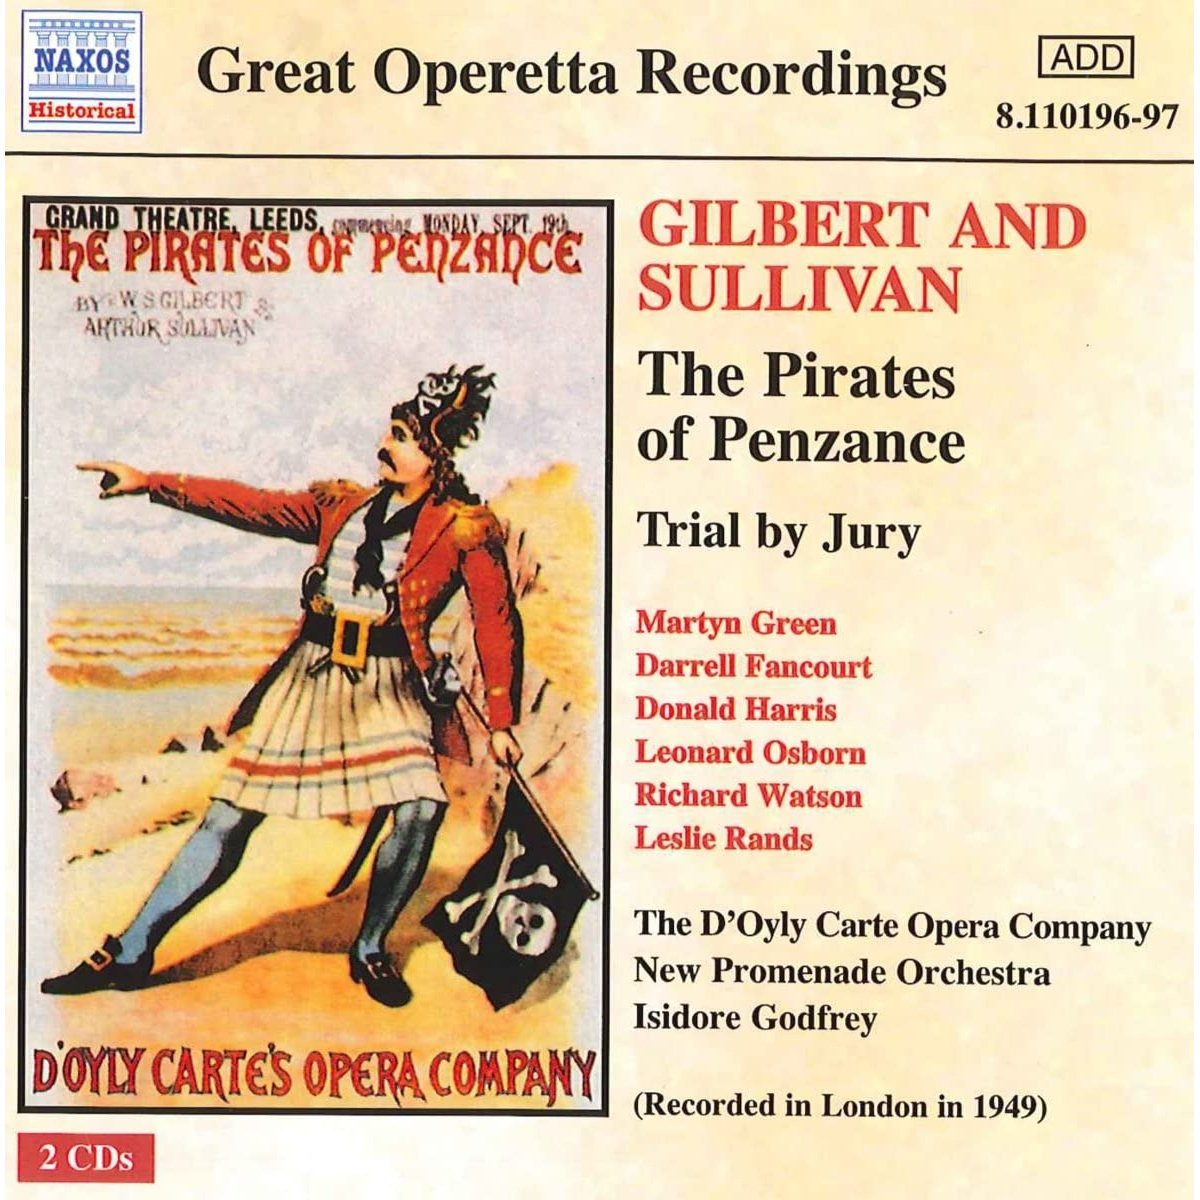 THE PIRATES OF PENZANCE, TRIAL BY JURY